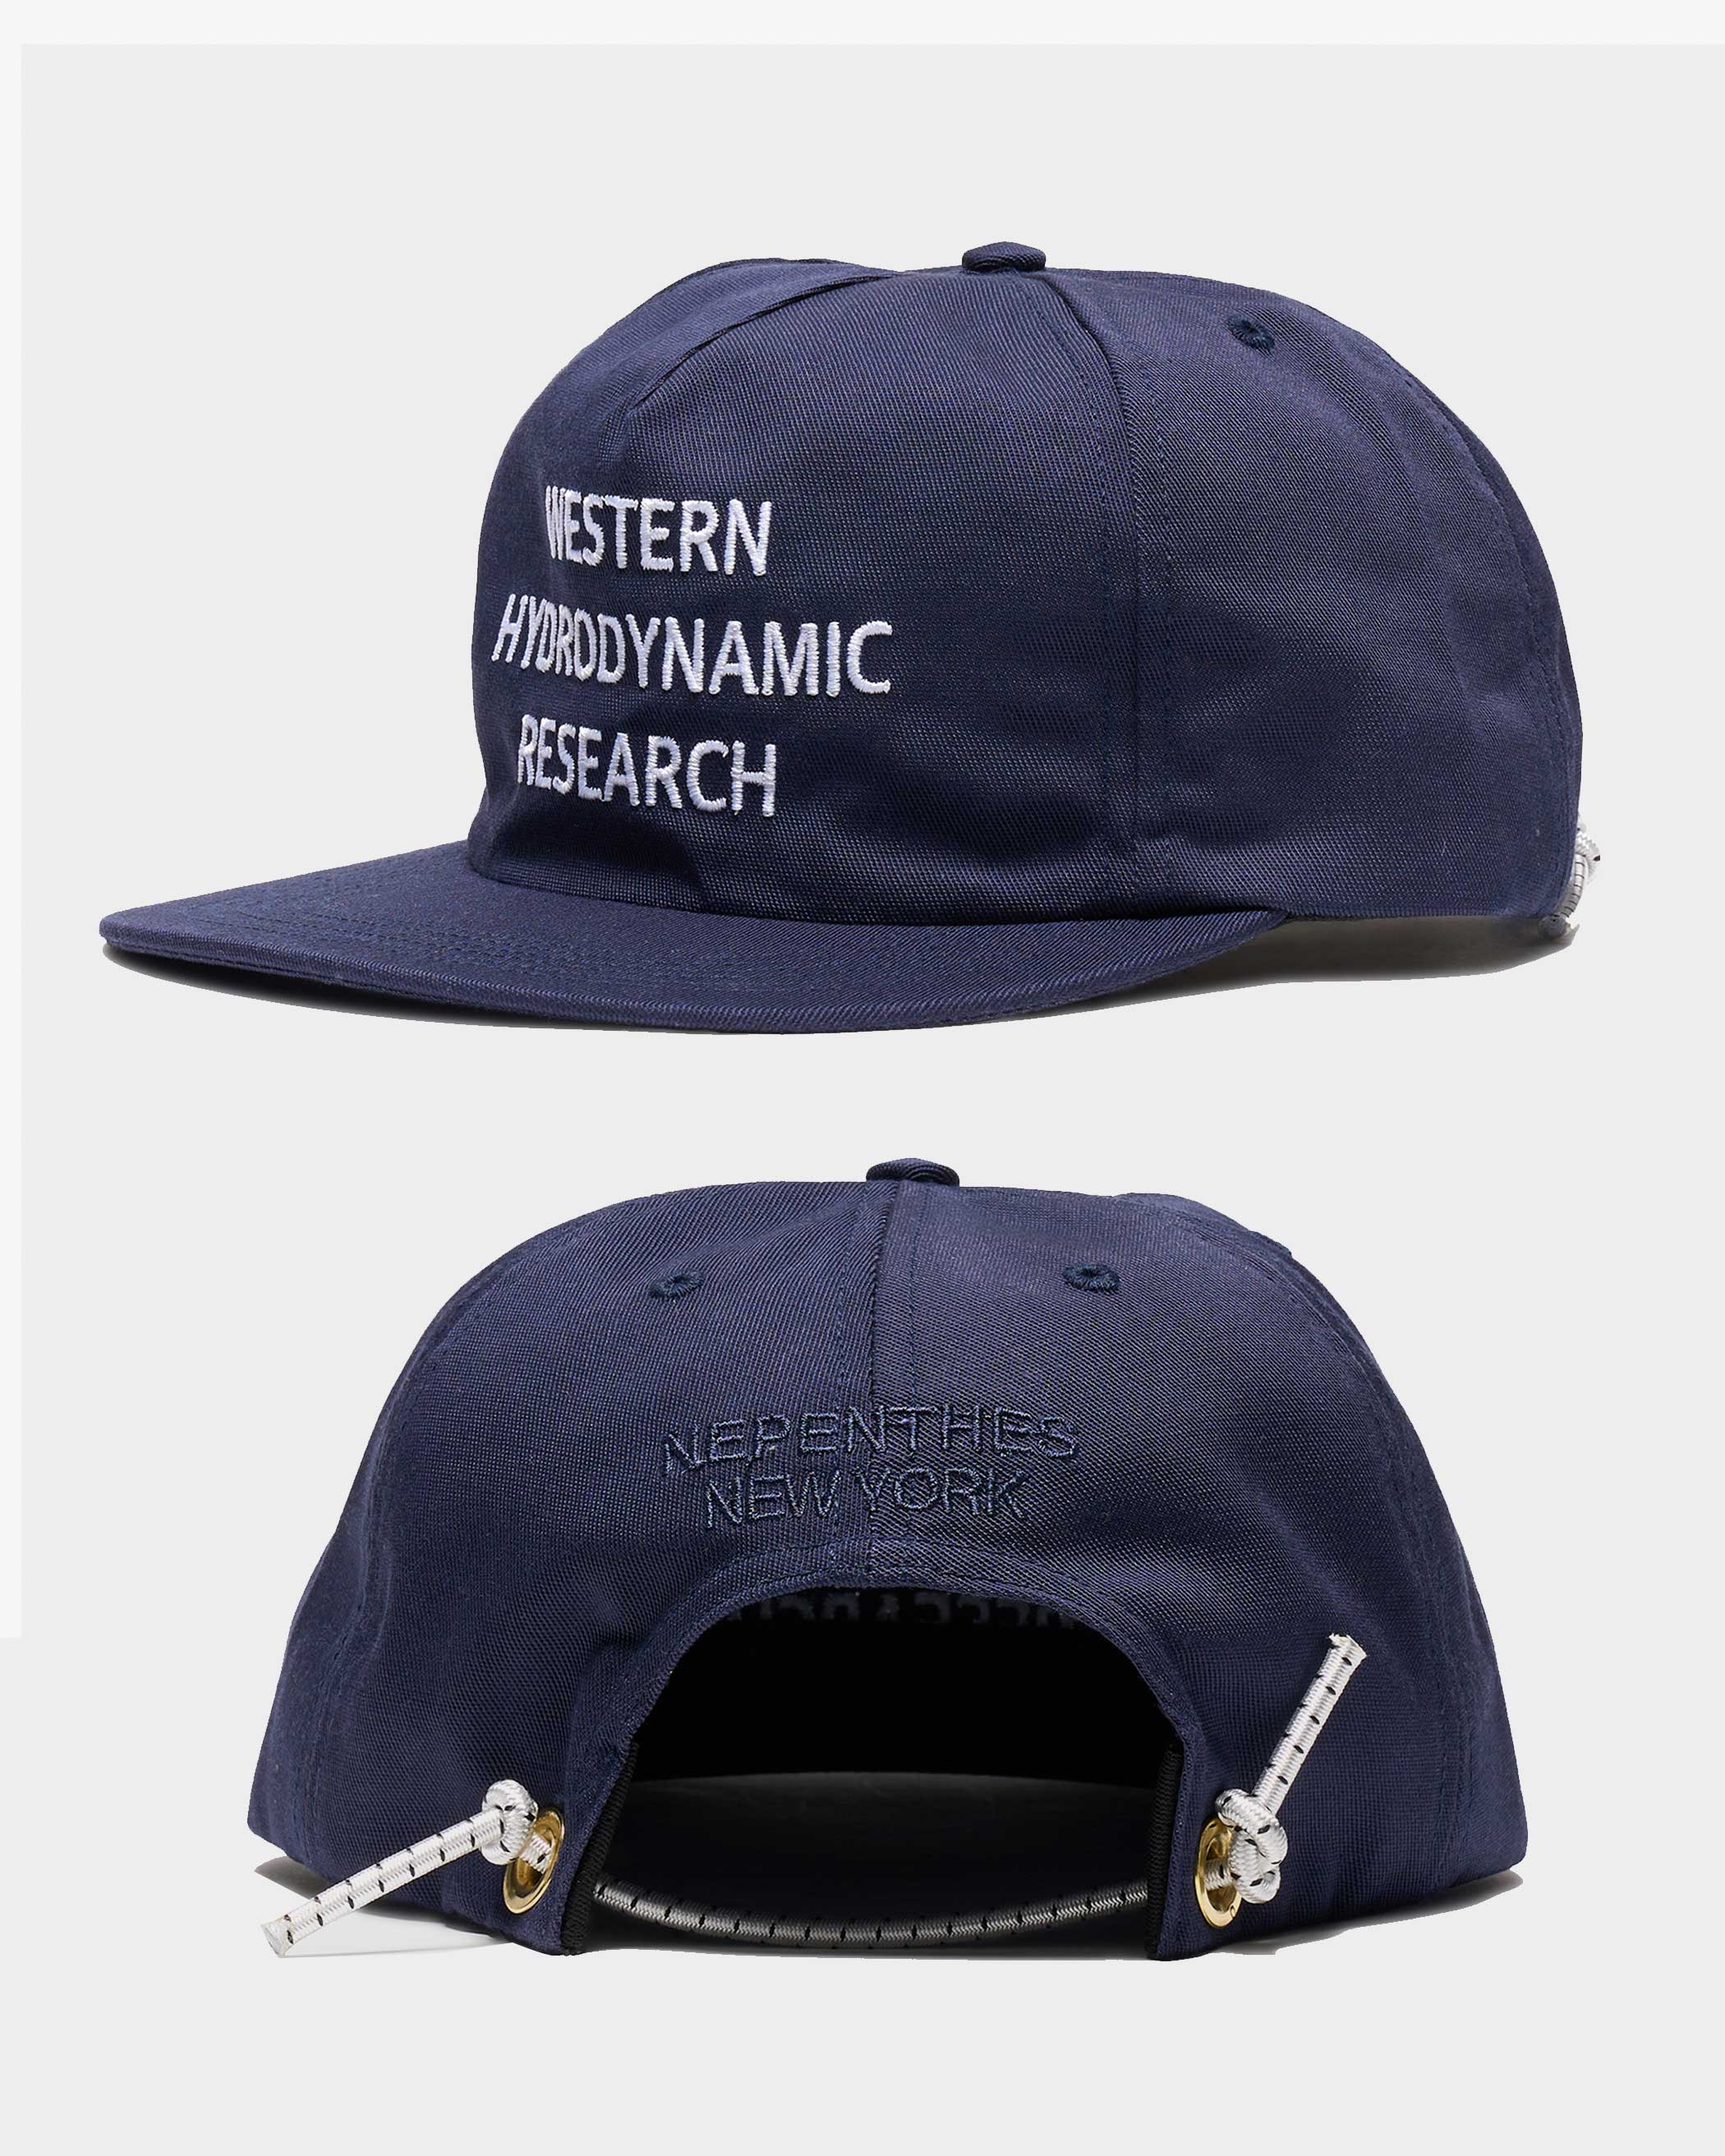 Special Release: Nepenthes New York x Western Hydrodynamic Research x Mafia Bags - Cord Cap